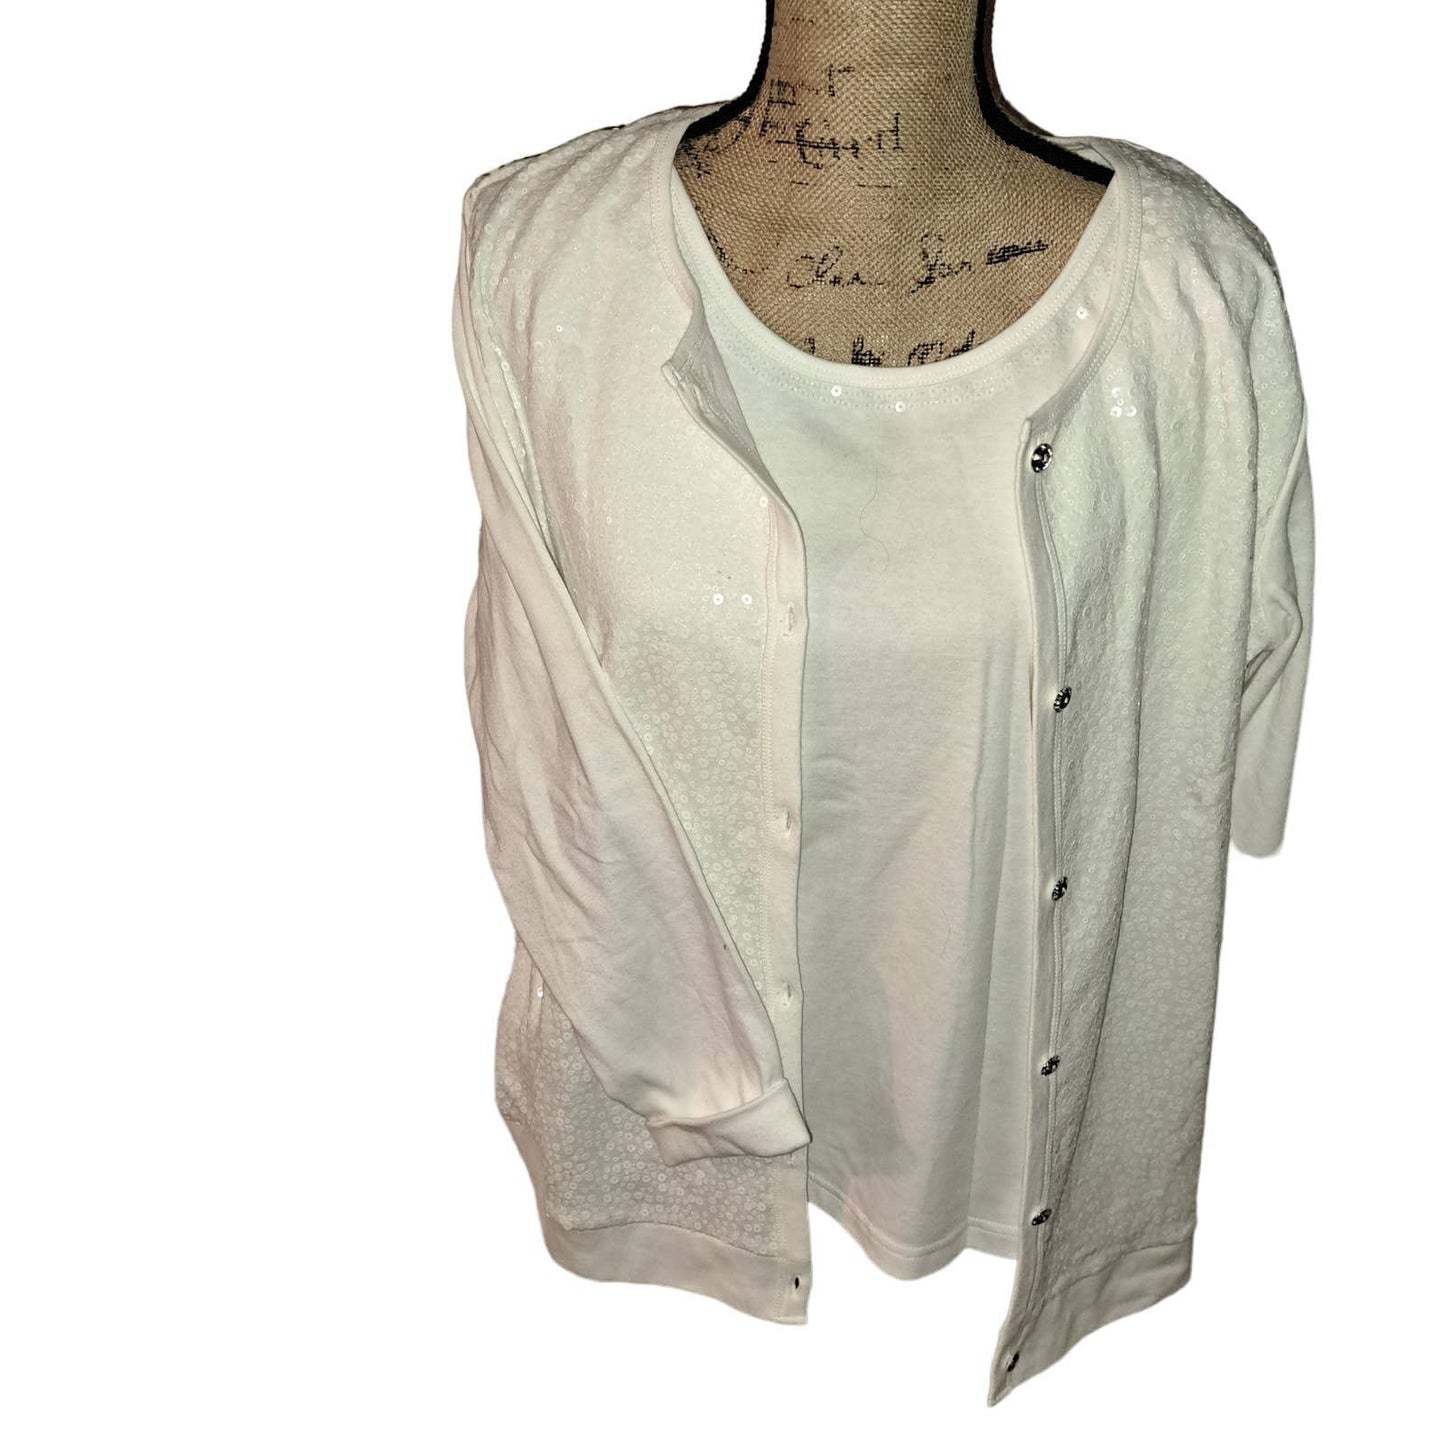 NEW Winter White Quaker factory Cardigan & attached Tee Crystal Buttons Large